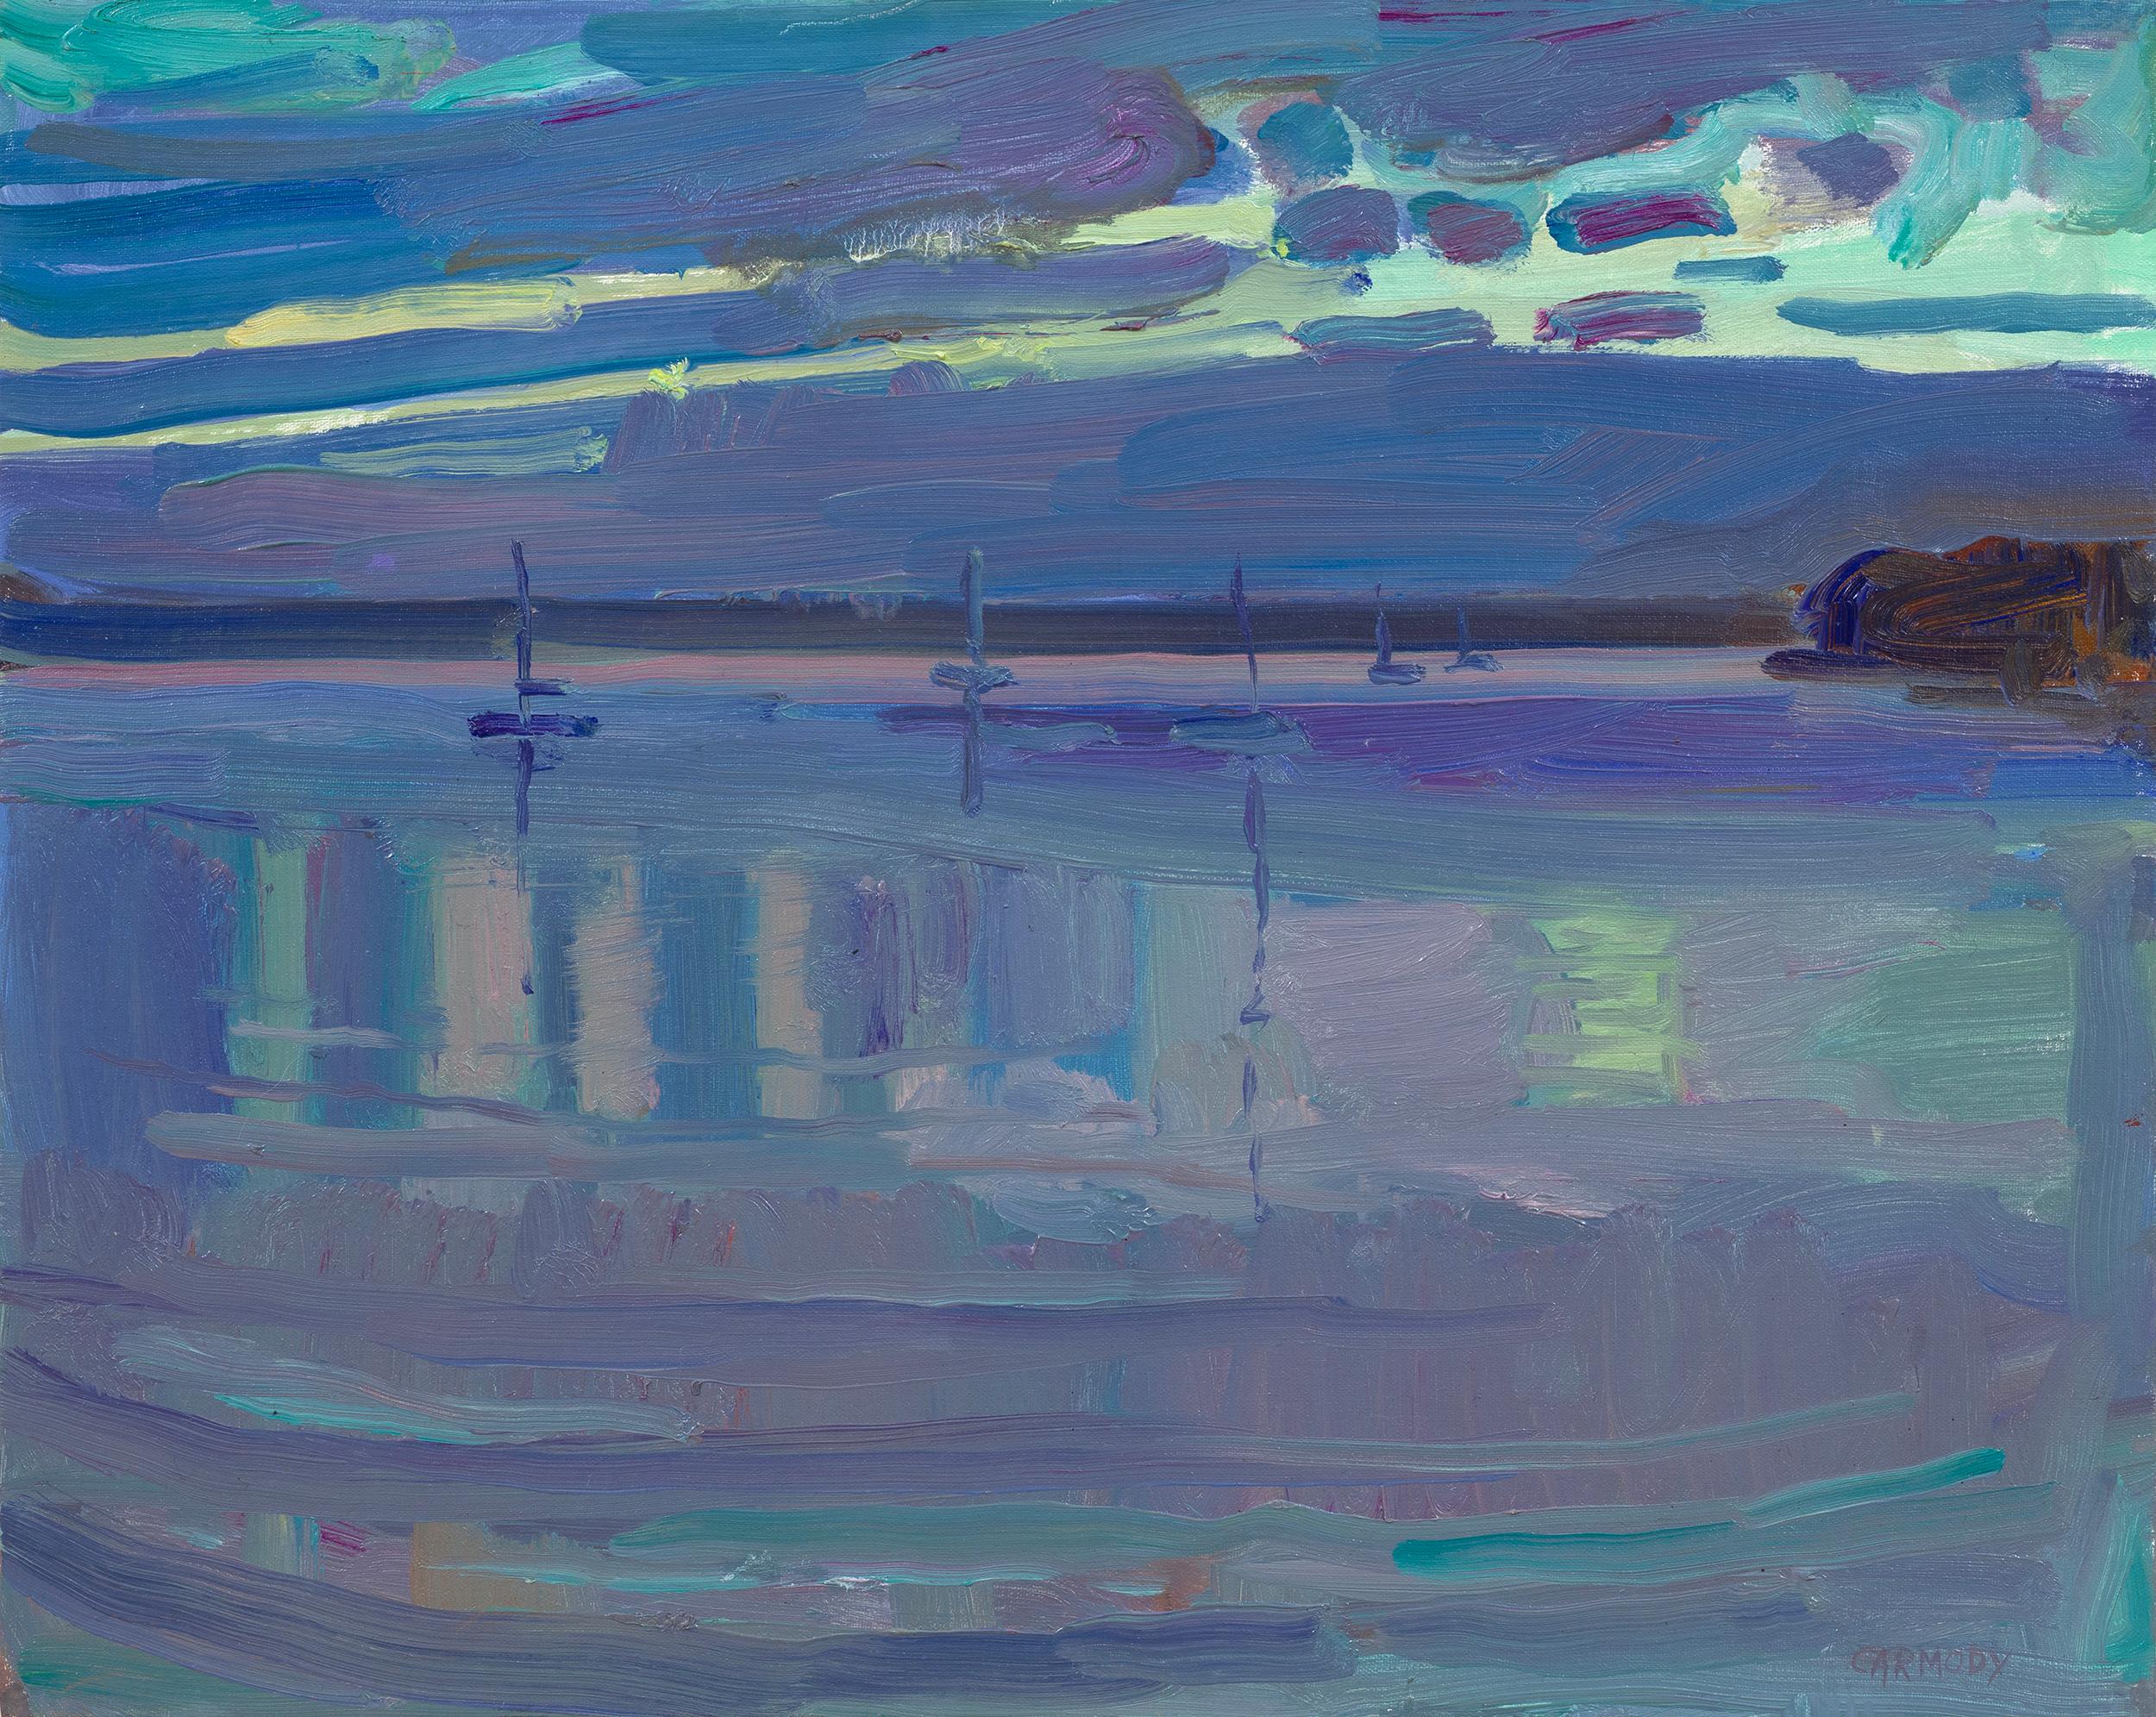 Kelly Carmody Landscape Painting - "Cloudy Evening, Dering Harbor" impressionist night view of northeastern harbor